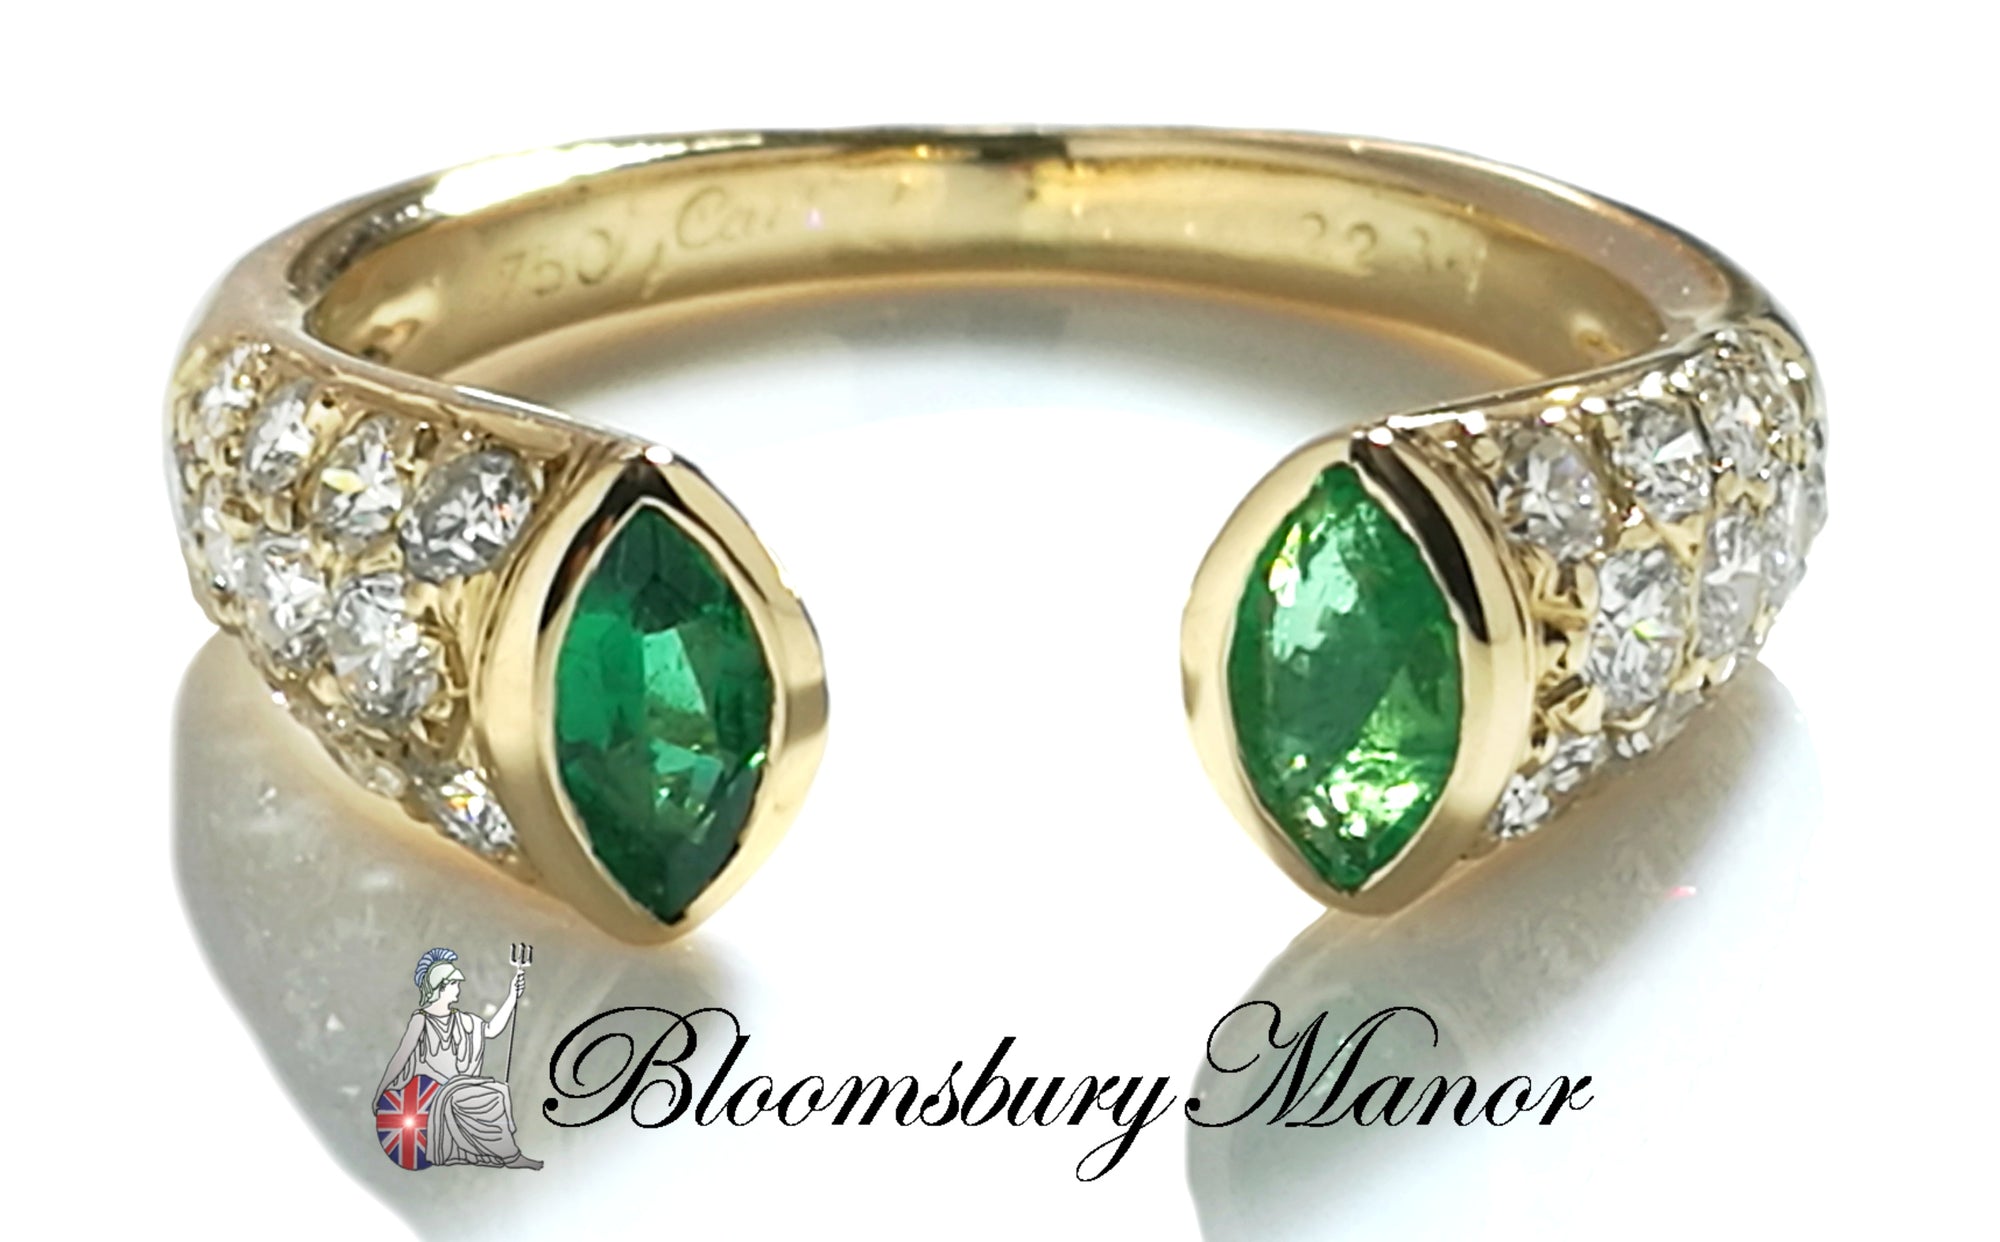 pre-owned, second hand, used, Cartier Diamond Emerald ring